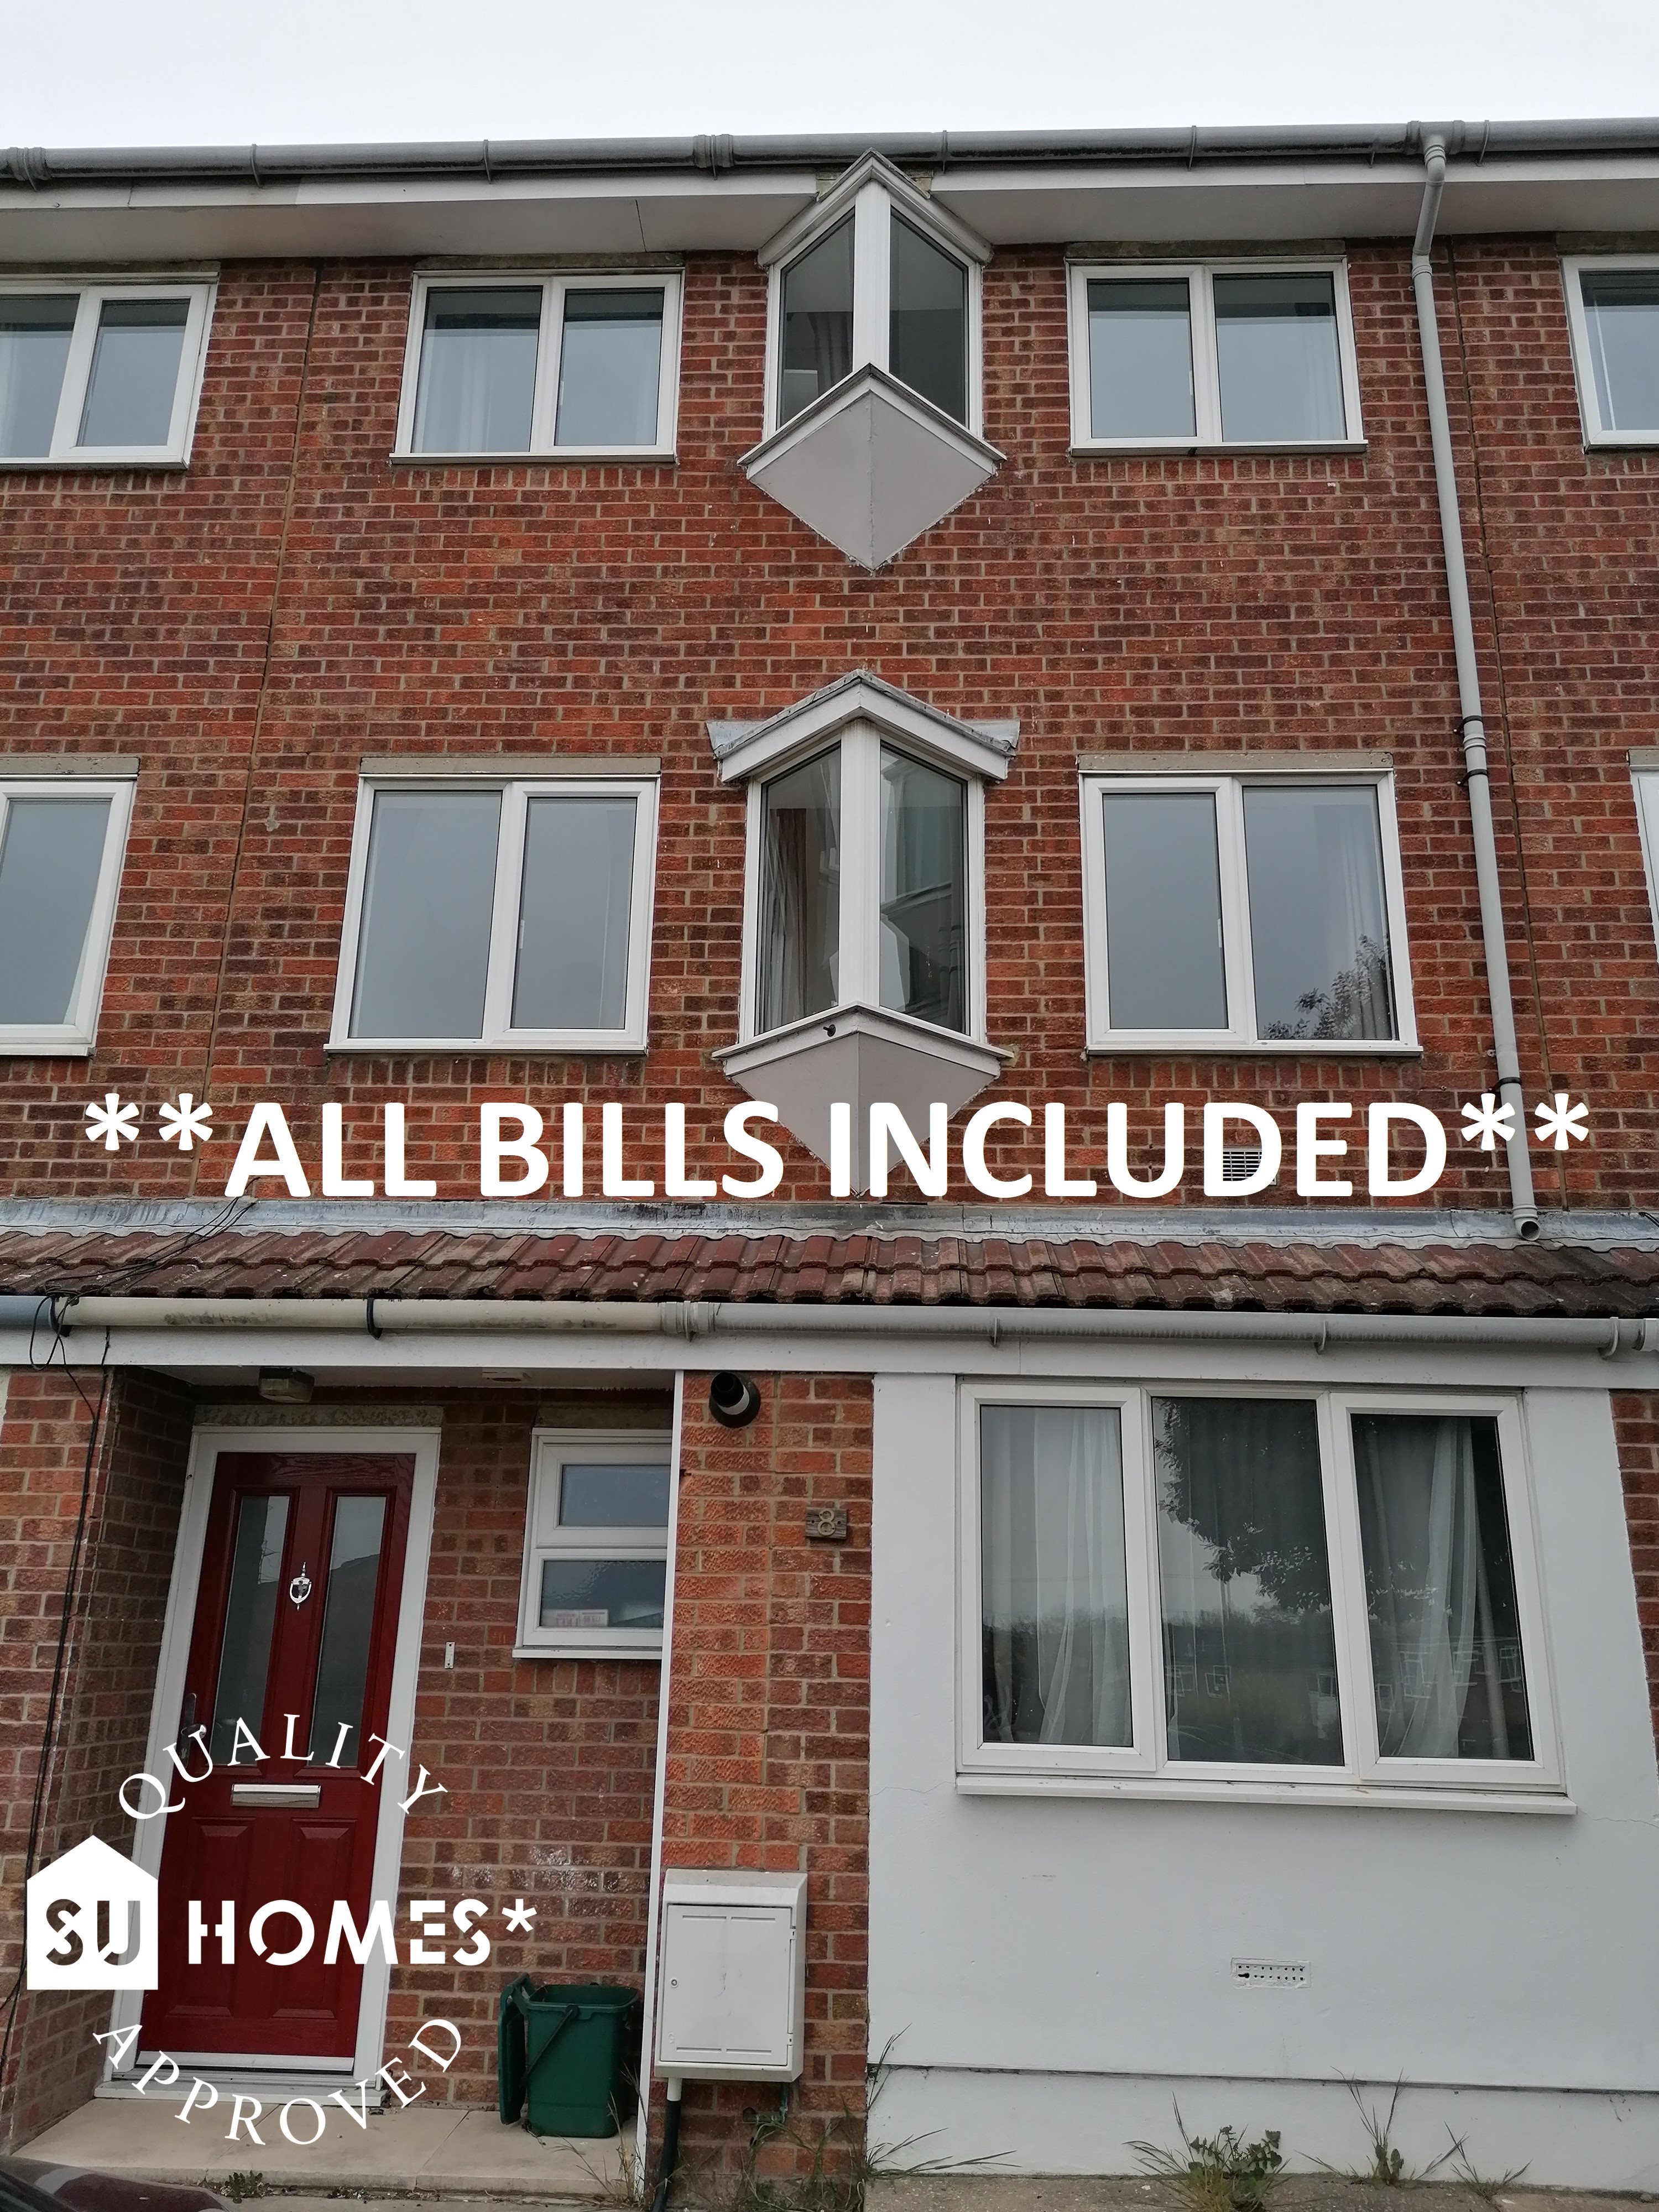 1 bed house / flat share to rent in Bennett Court, CO4 